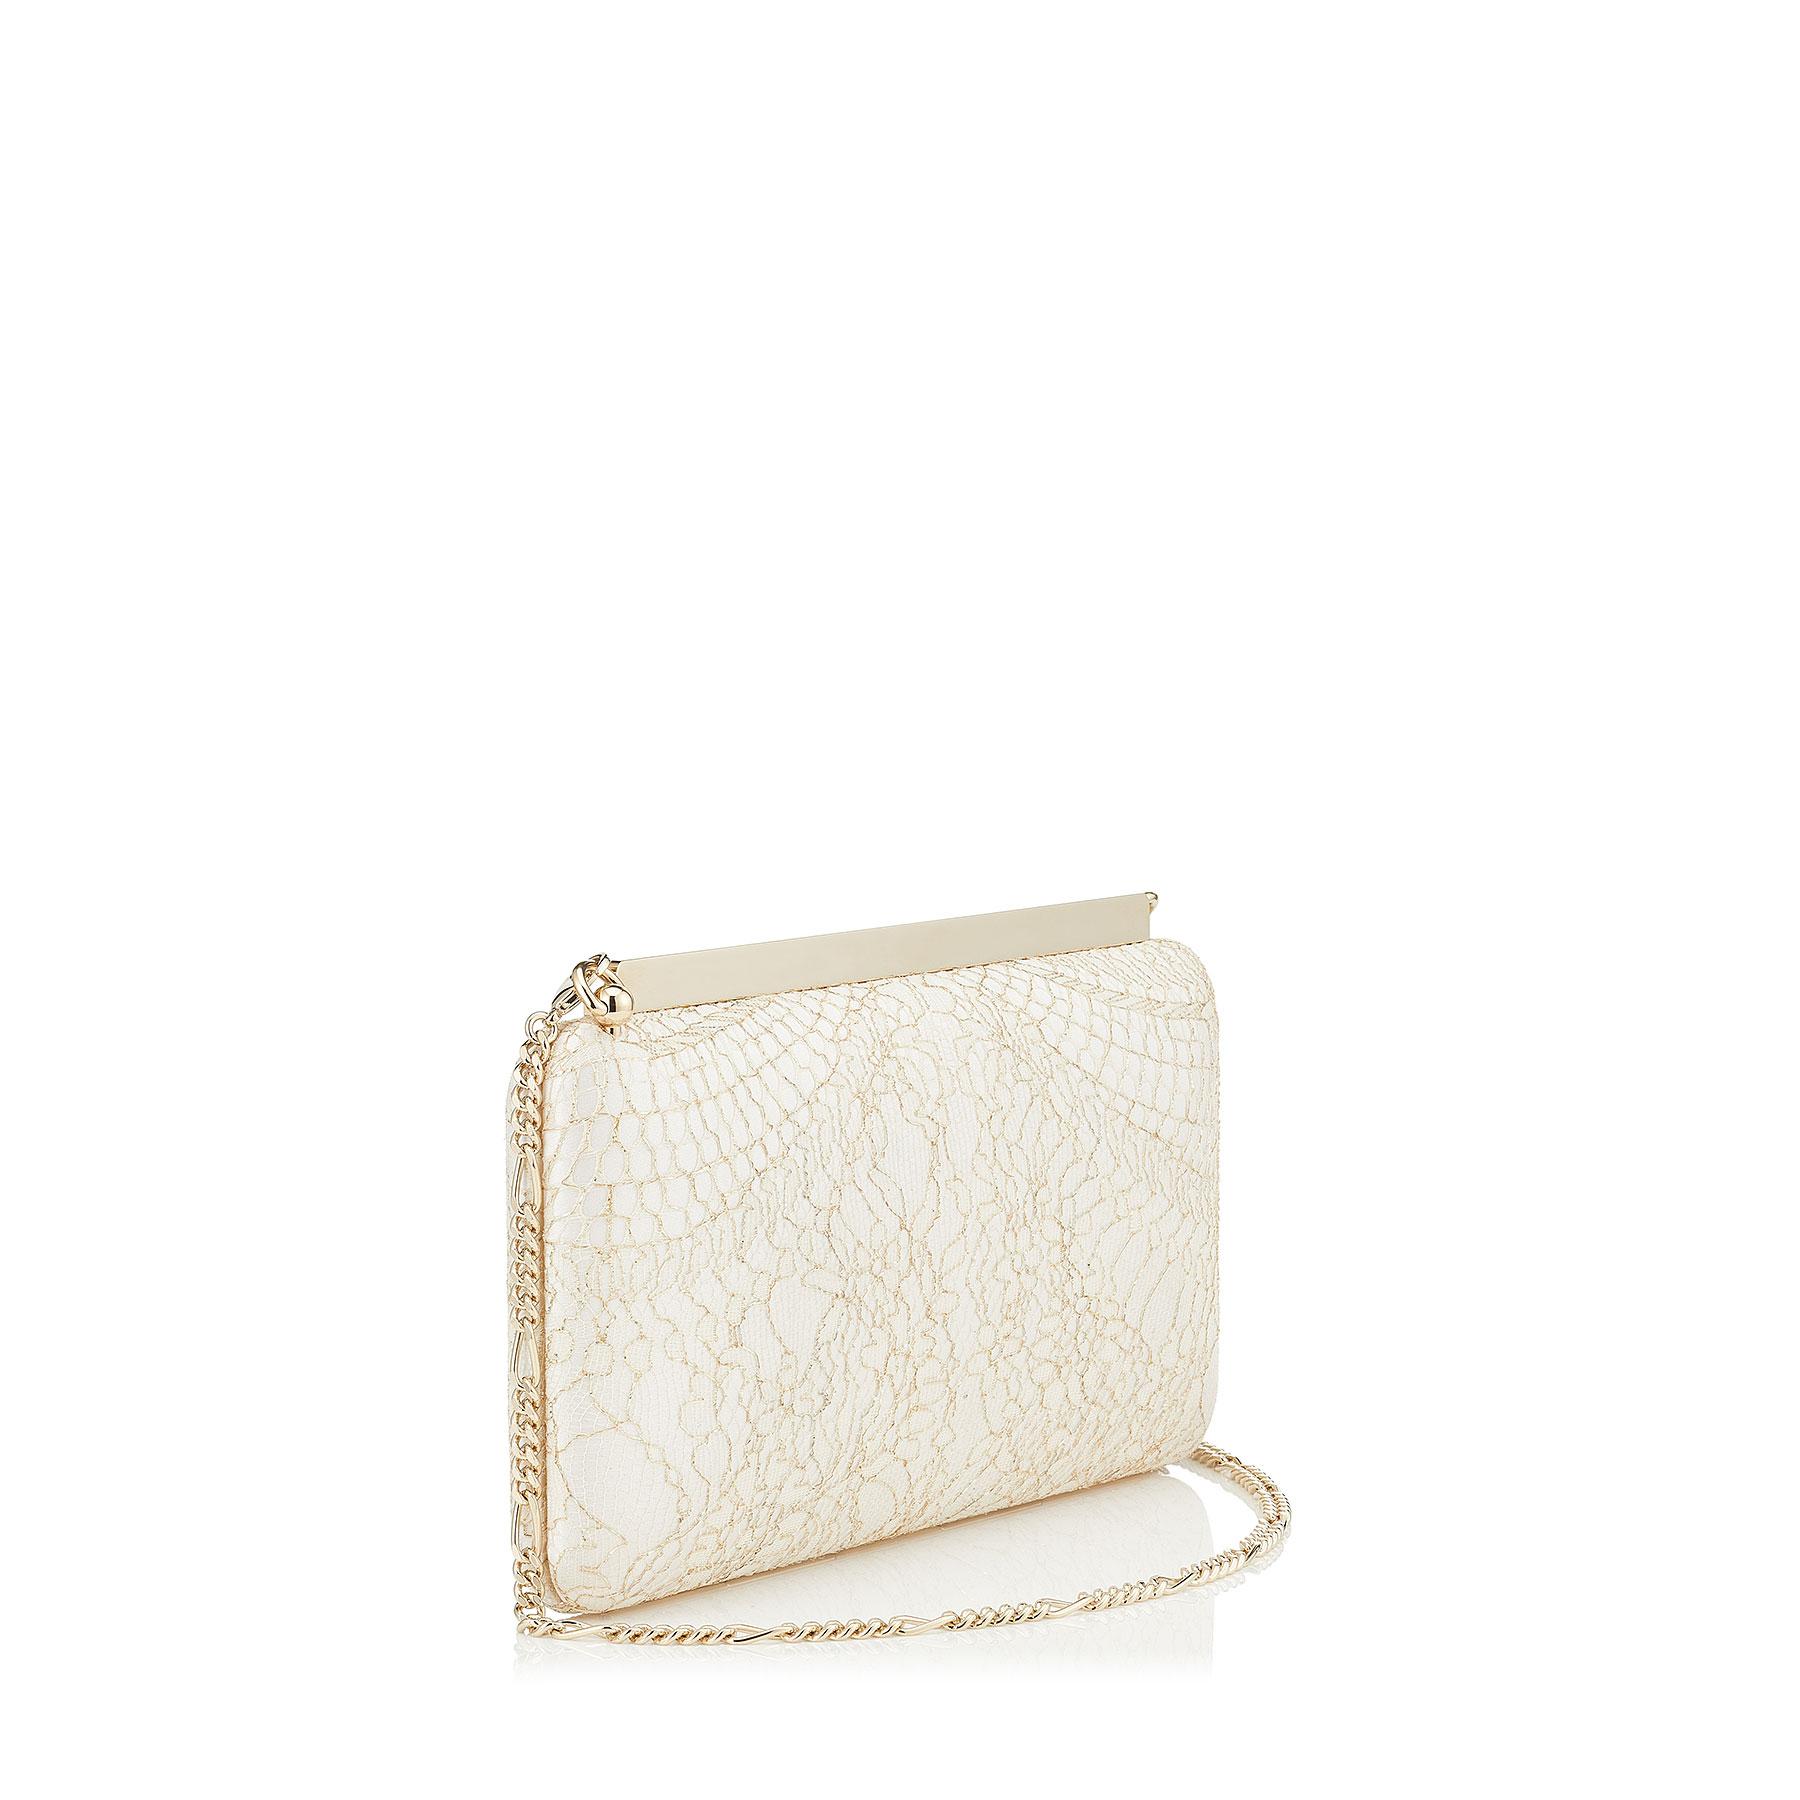 Jimmy Choo Ellipse Champagne Sparkly Lace Clutch Bag in Metallic | Lyst